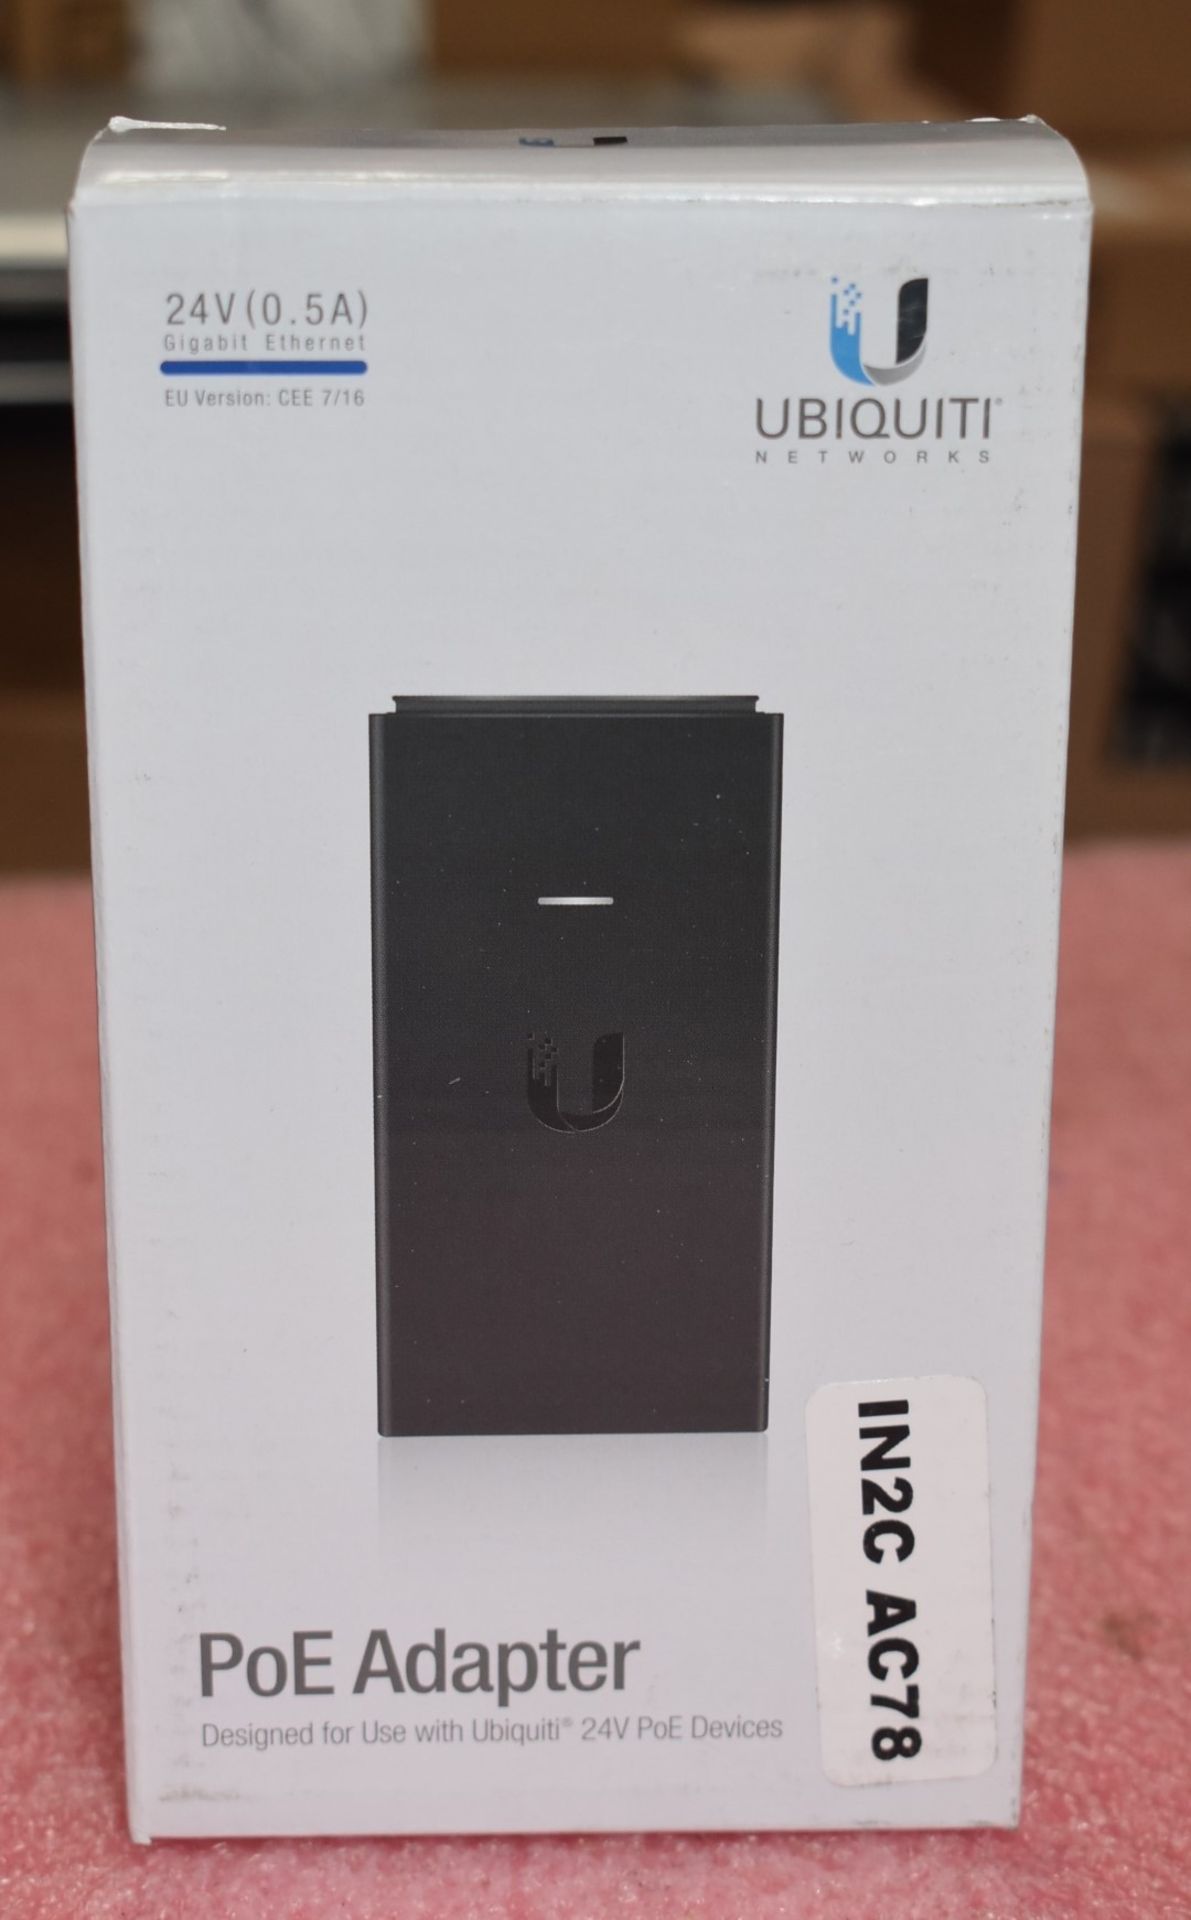 1 x Ubiquiti Gigabit Passive Power Over Ethernet PoE Injector - 24V 0.5A - New Boxed Stock - Image 6 of 6